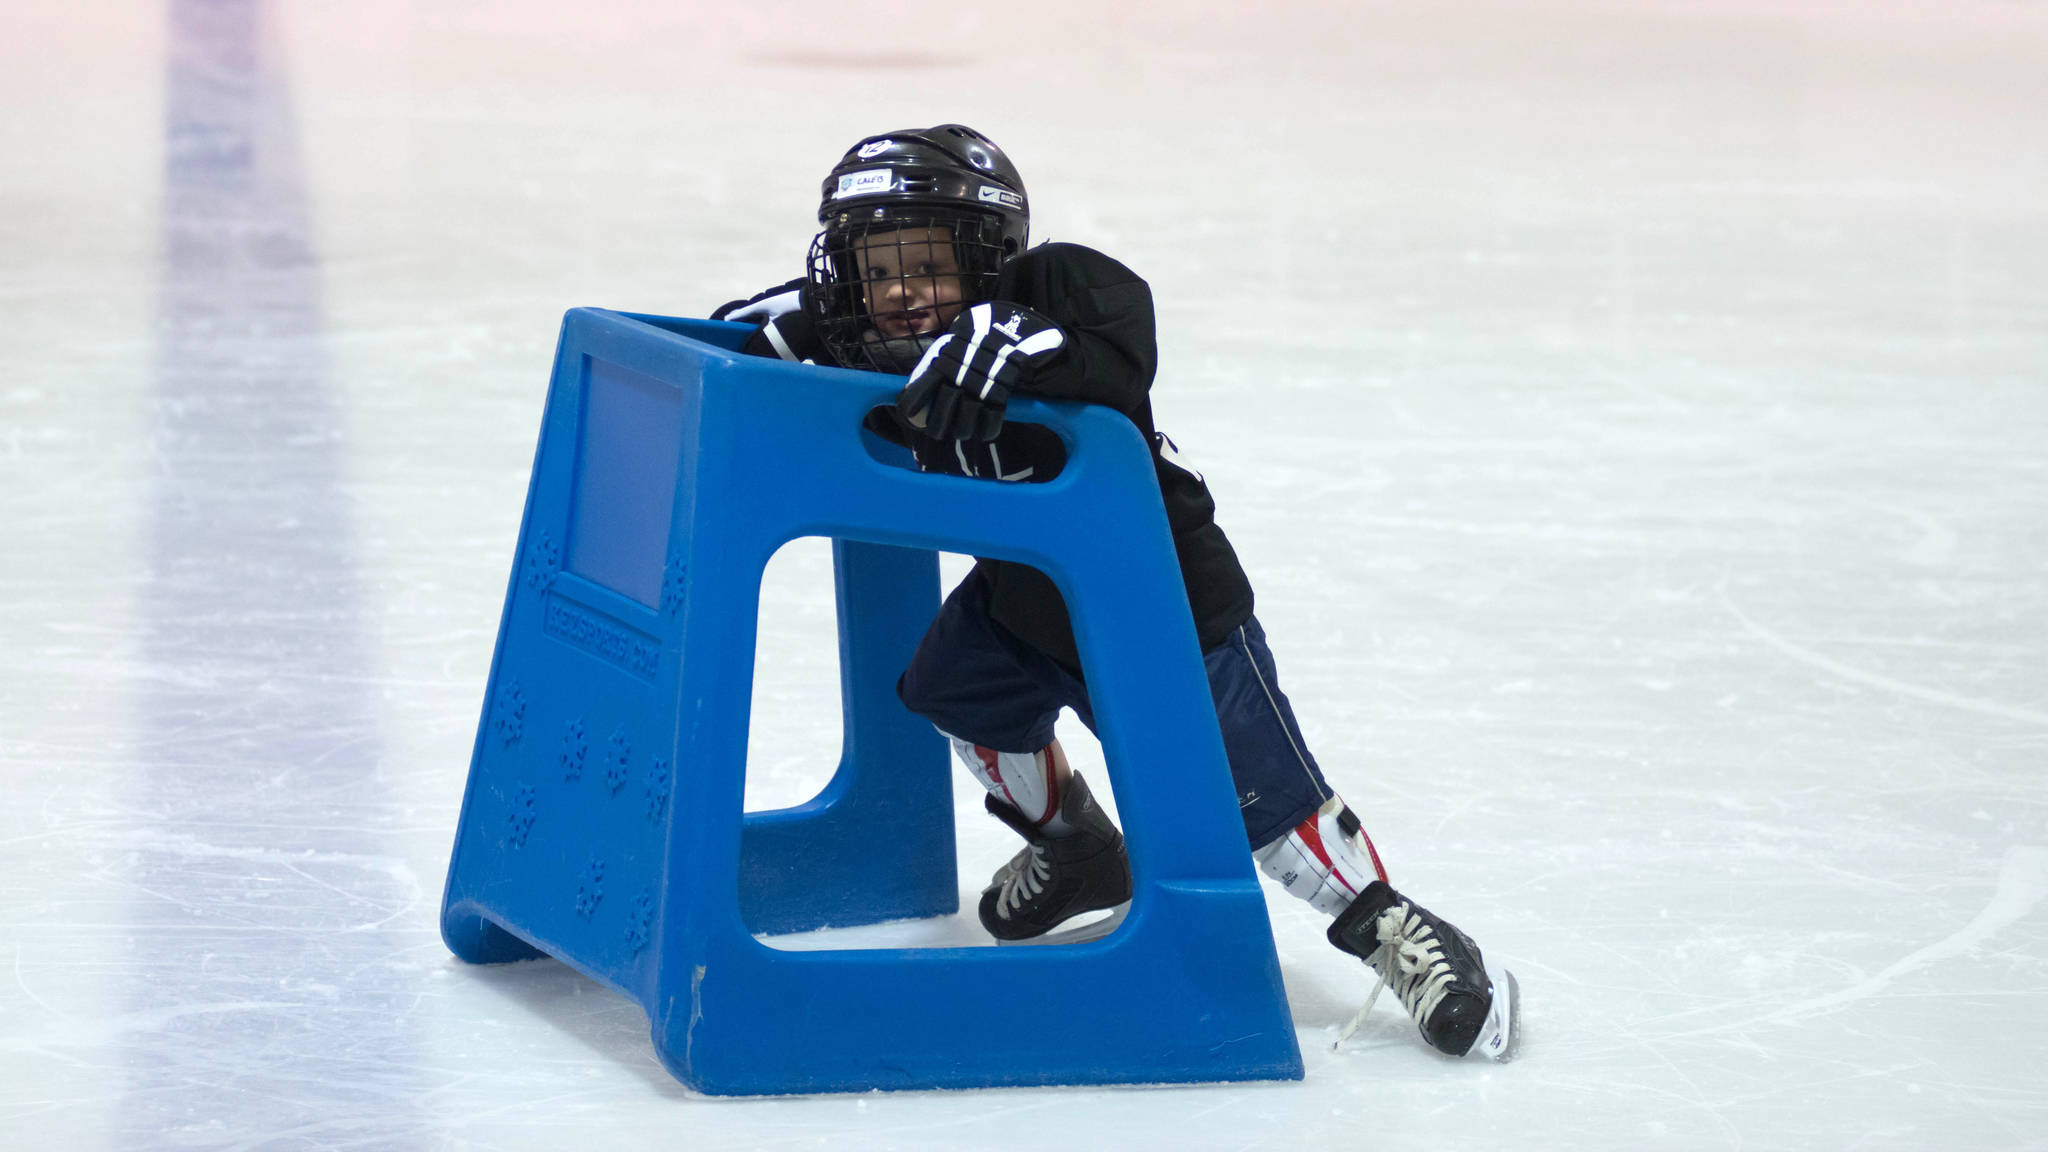 A young boy learns to skate at last year’s Discover Hockey Day at Treadwell Ice Arena. (Photo courtesy of Steve Quinn)